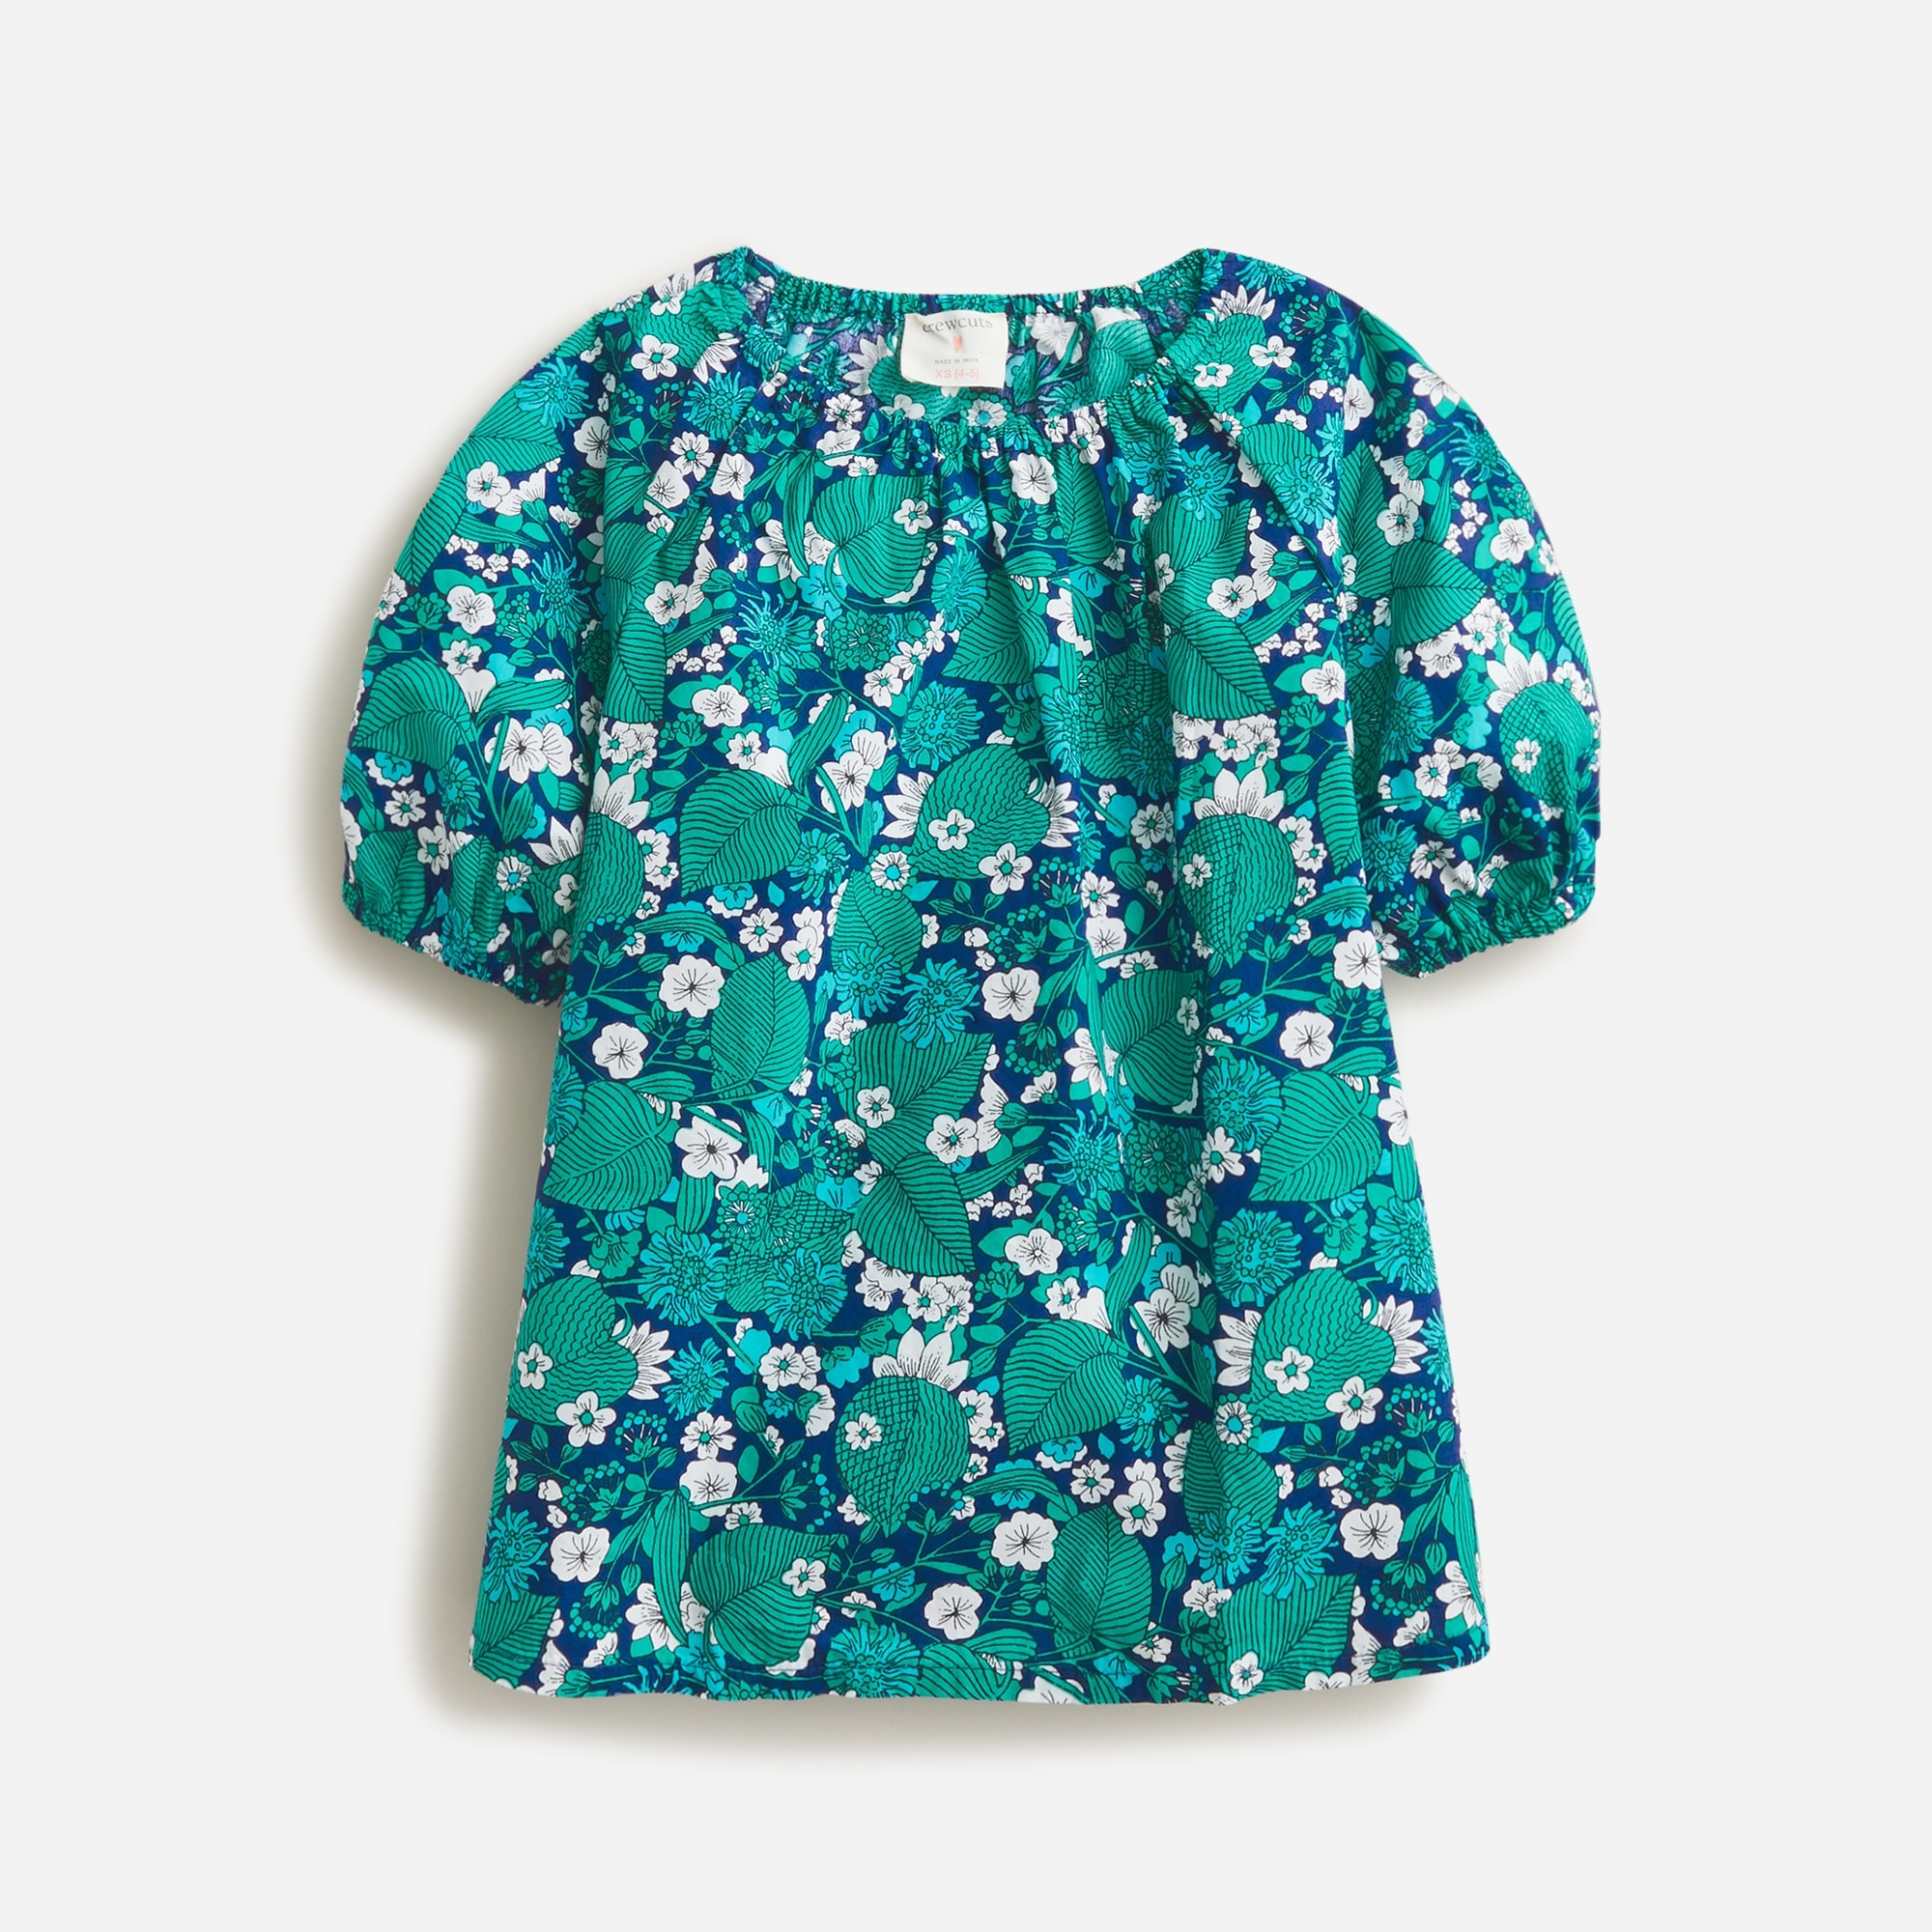  Girls' puff-sleeve top in emerald forest floral